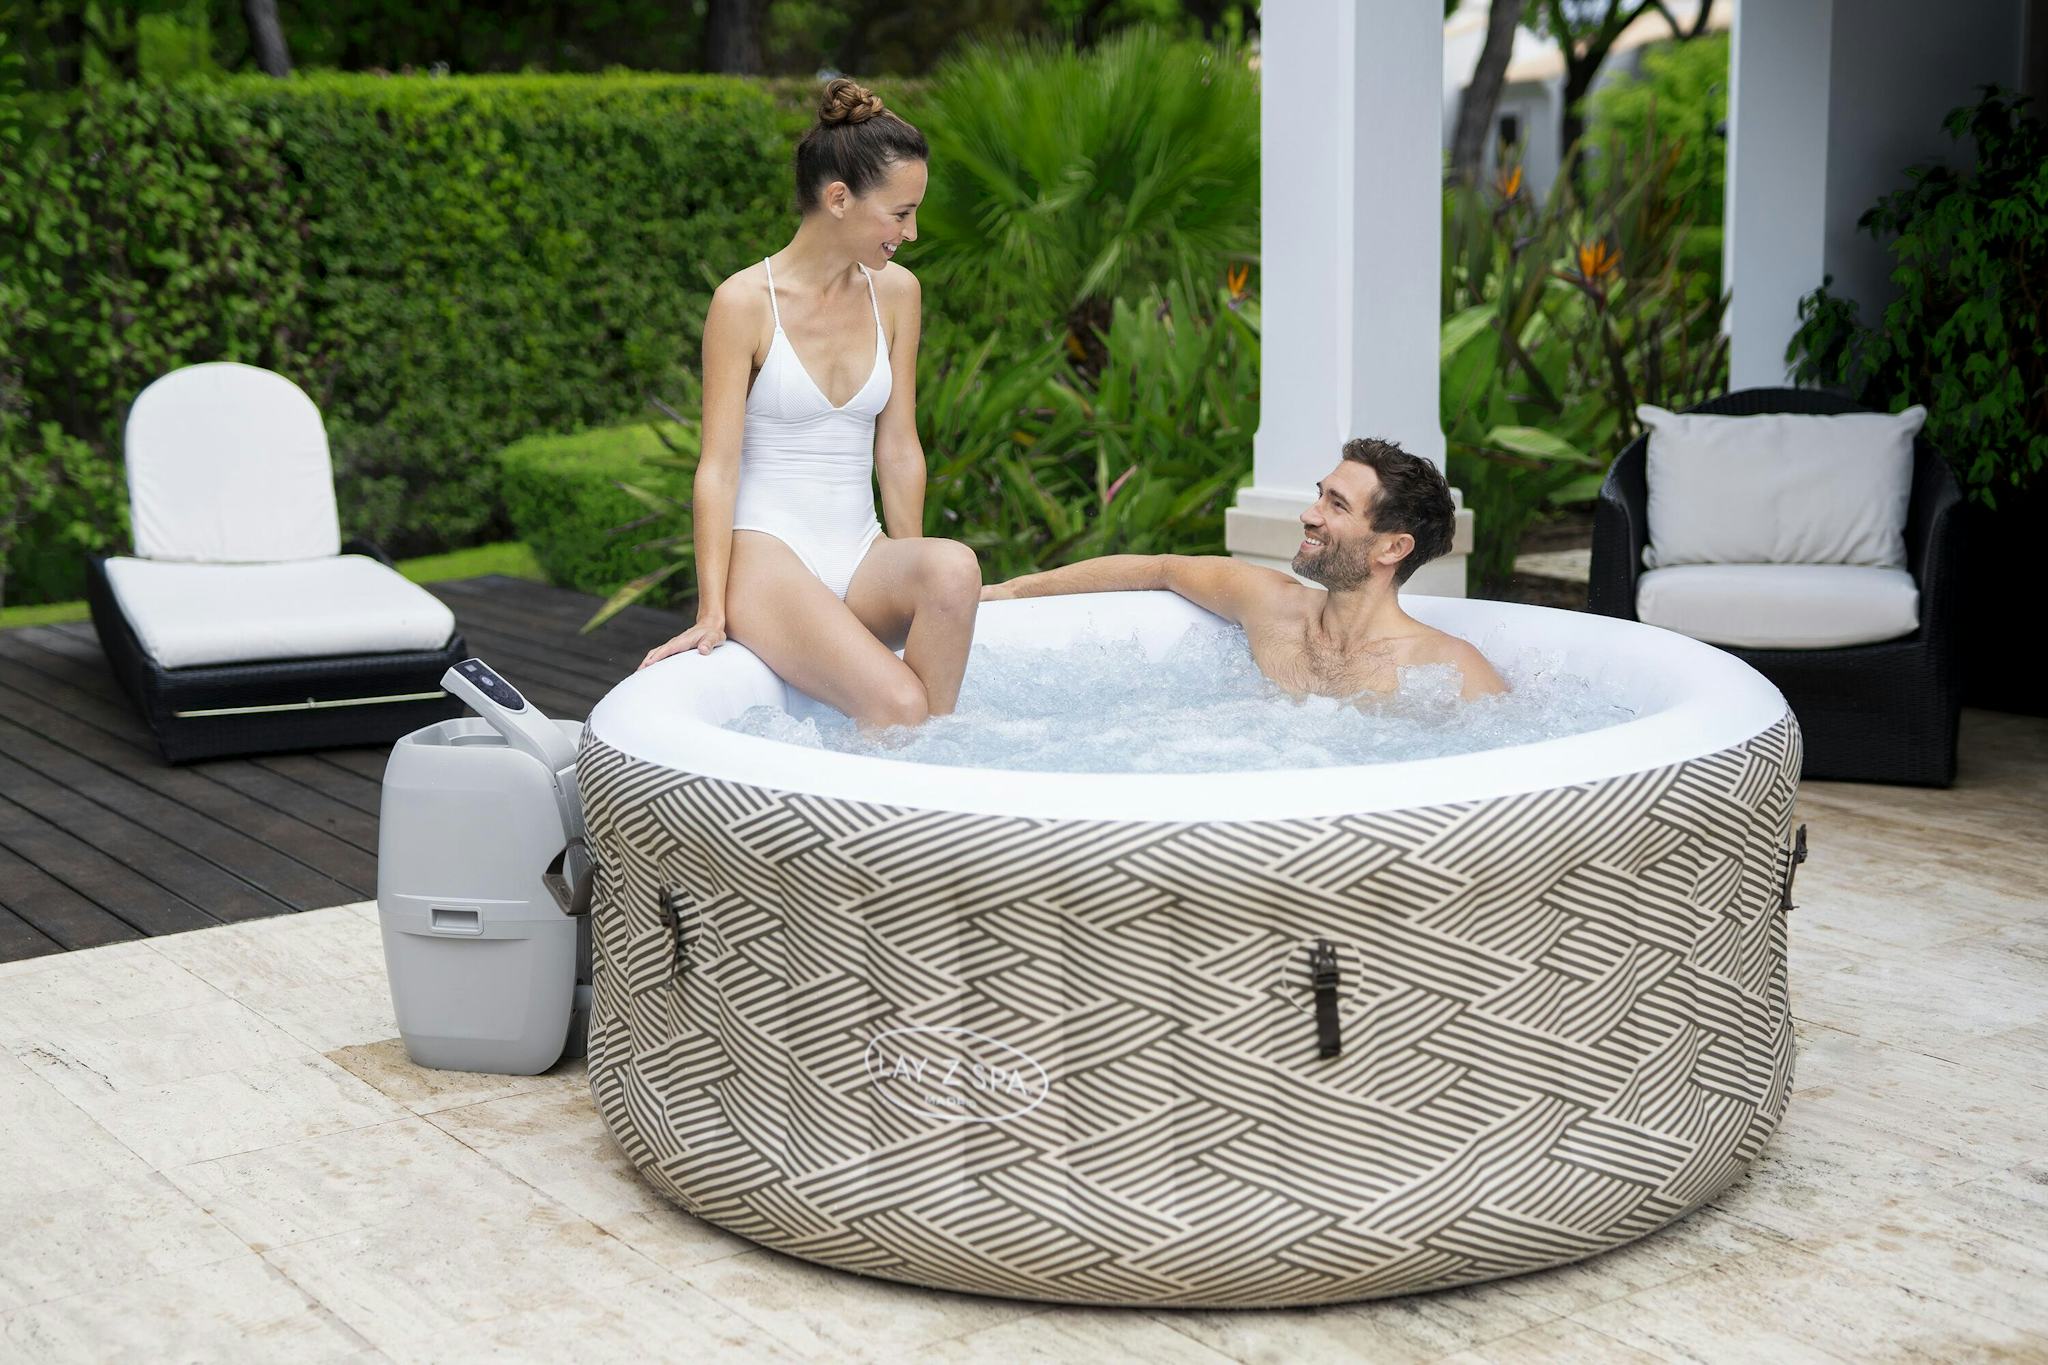 Spas Gonflables Spa gonflable rond Lay-Z-Spa Madrid Airjet™ 2 - 4 personnes Bestway 17